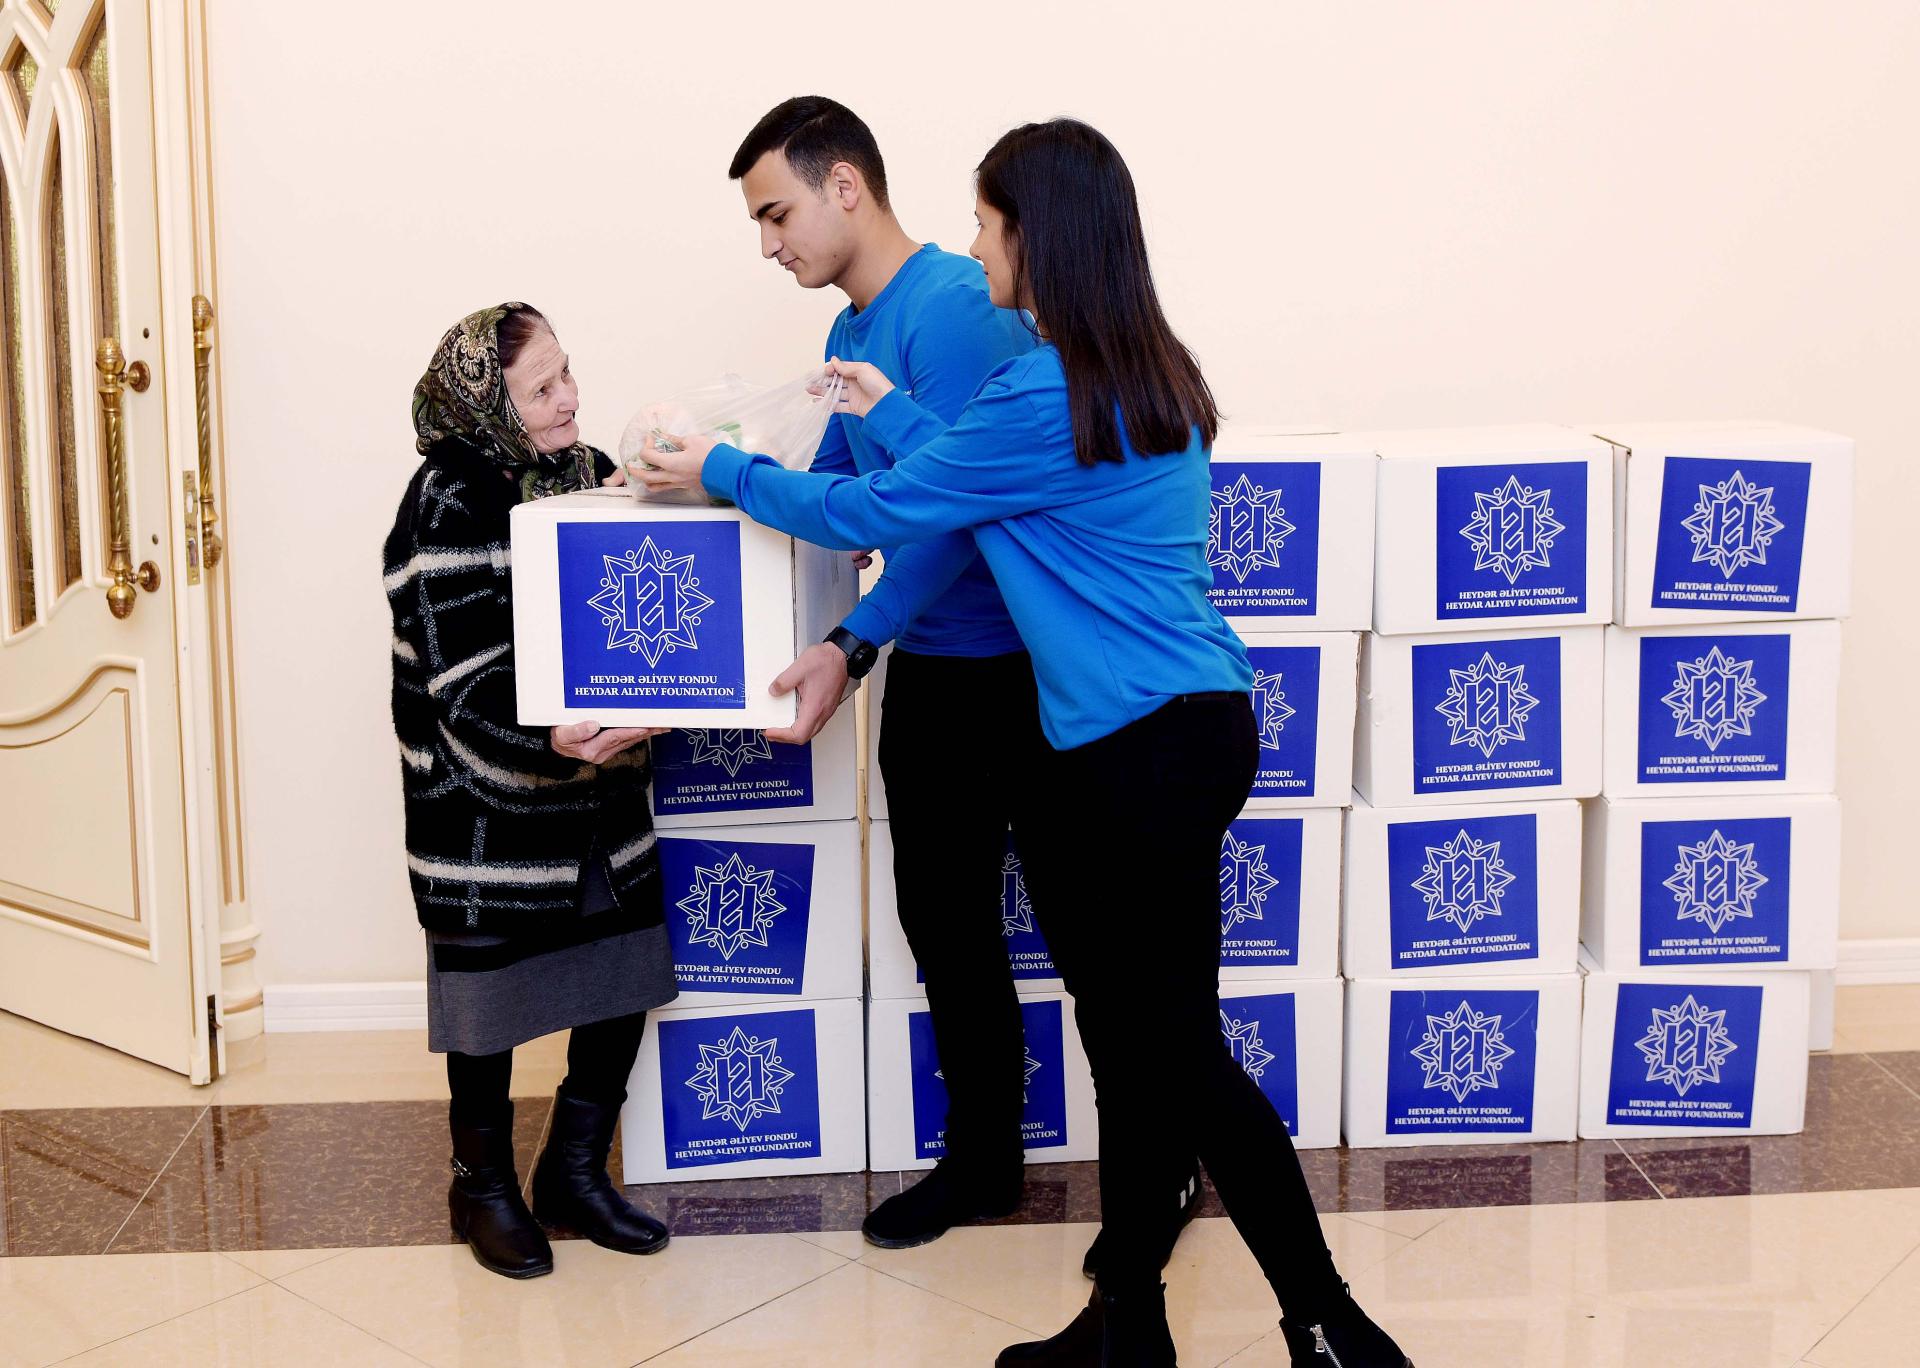 Heydar Aliyev Foundation distributes holiday gifts to low-income families (PHOTO)